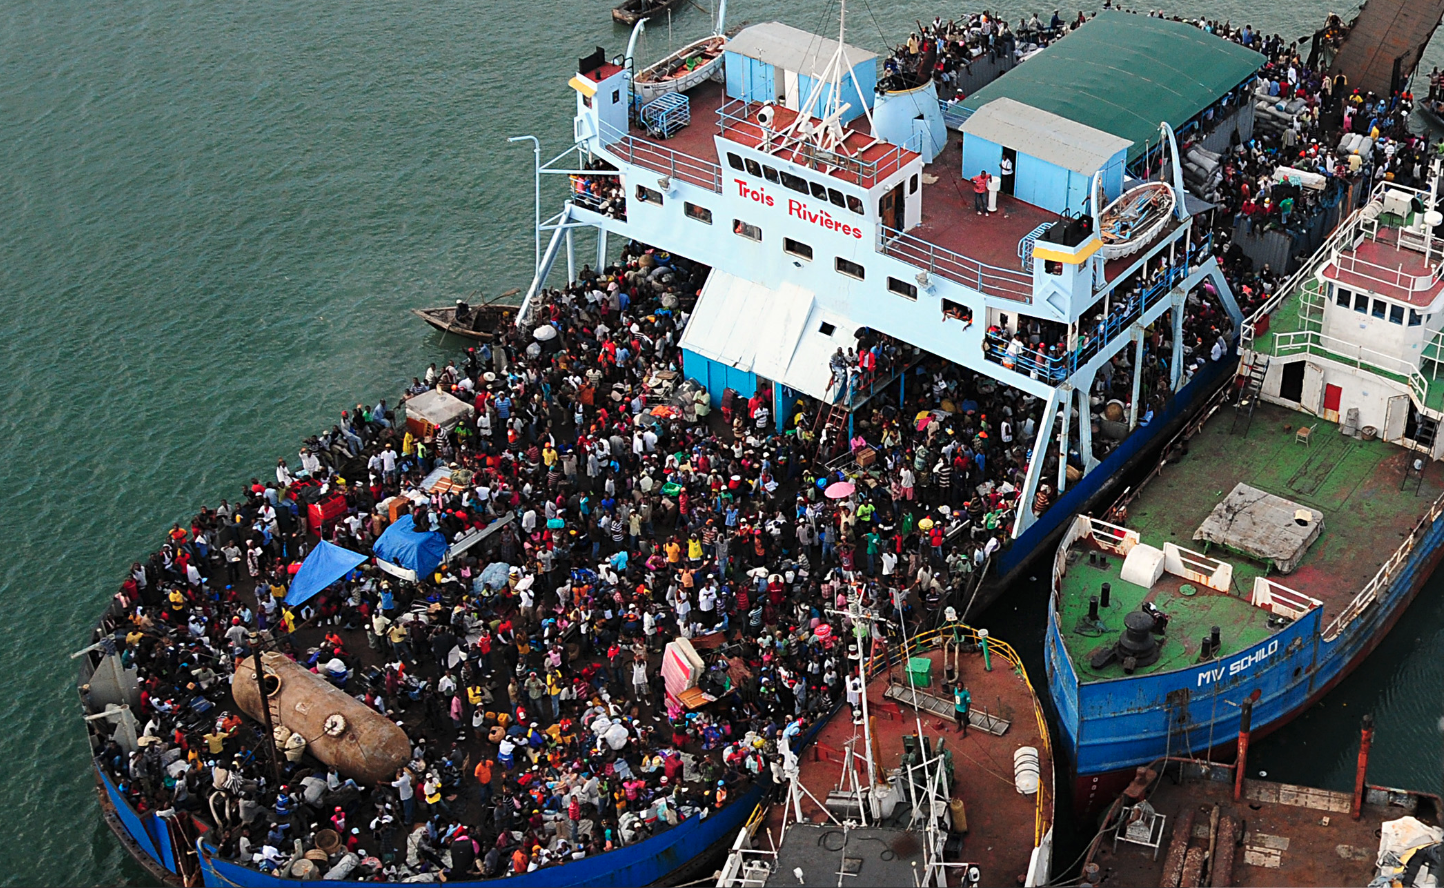 Haitian citizens crowding on a ship